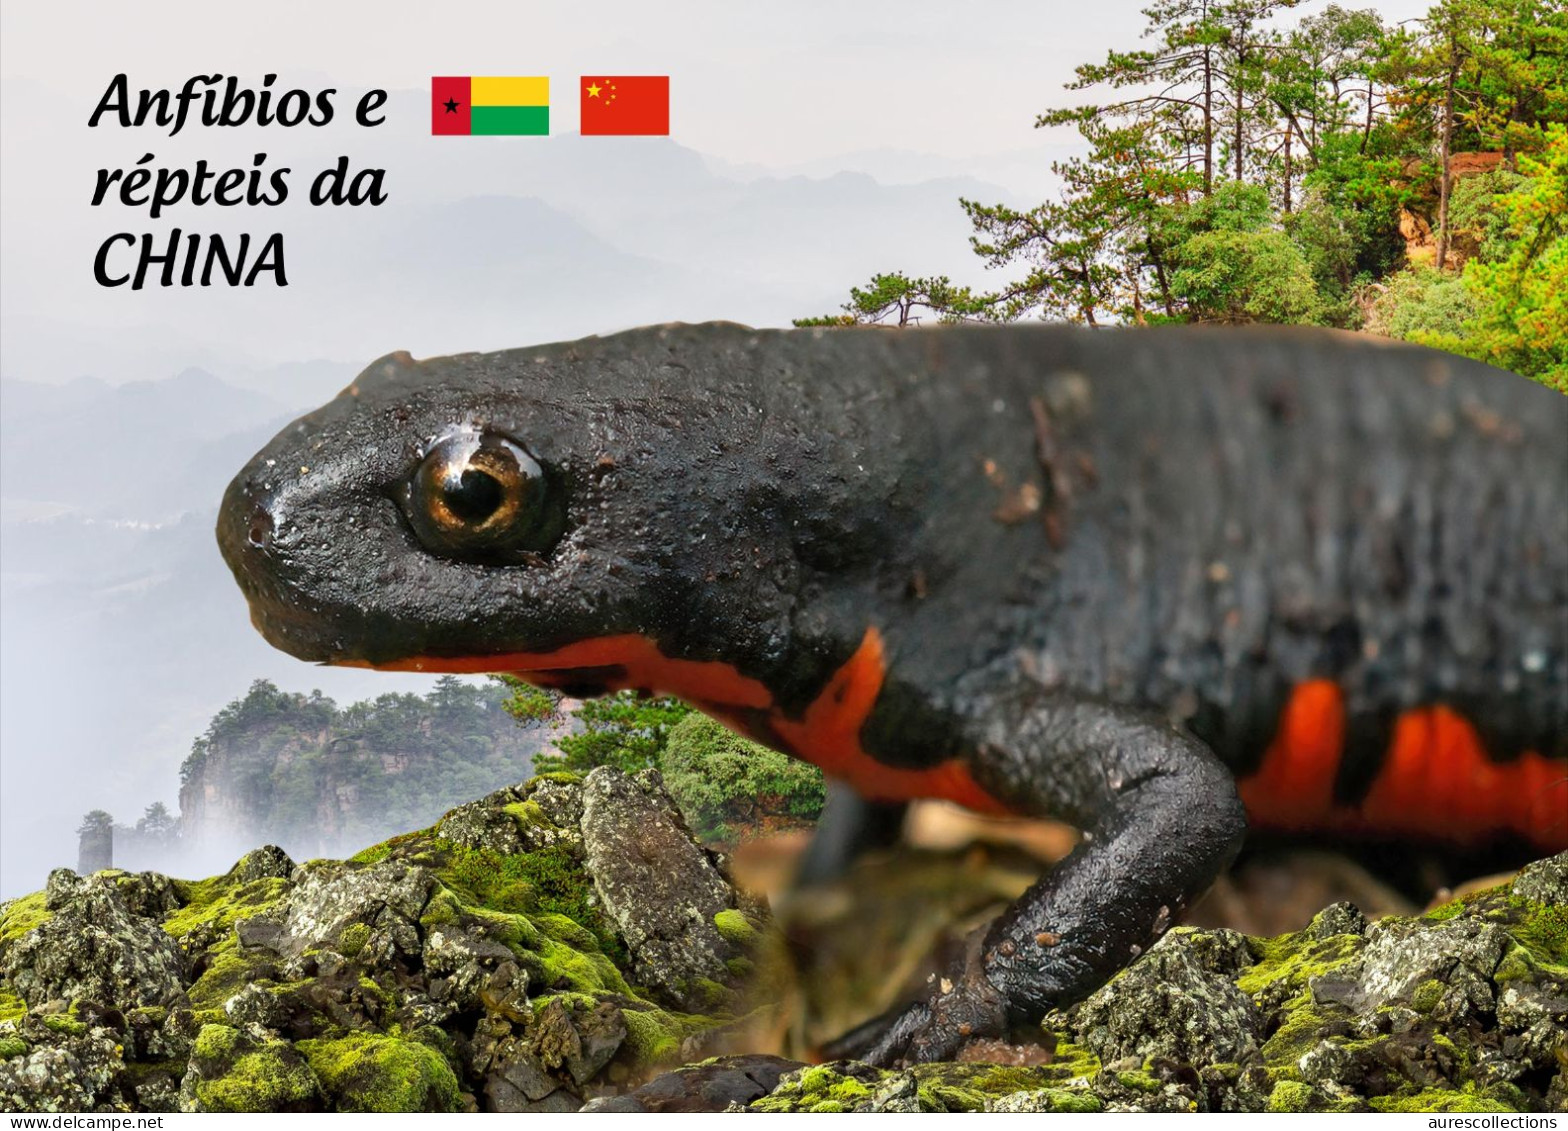 GUINEA BISSAU 2024 STATIONERY CARD 6V - CHINA AMPHIBIANS & REPTILES FROG FROGS TURTLE TURTLES SNAKES CROCODILE NEWT - Ranas